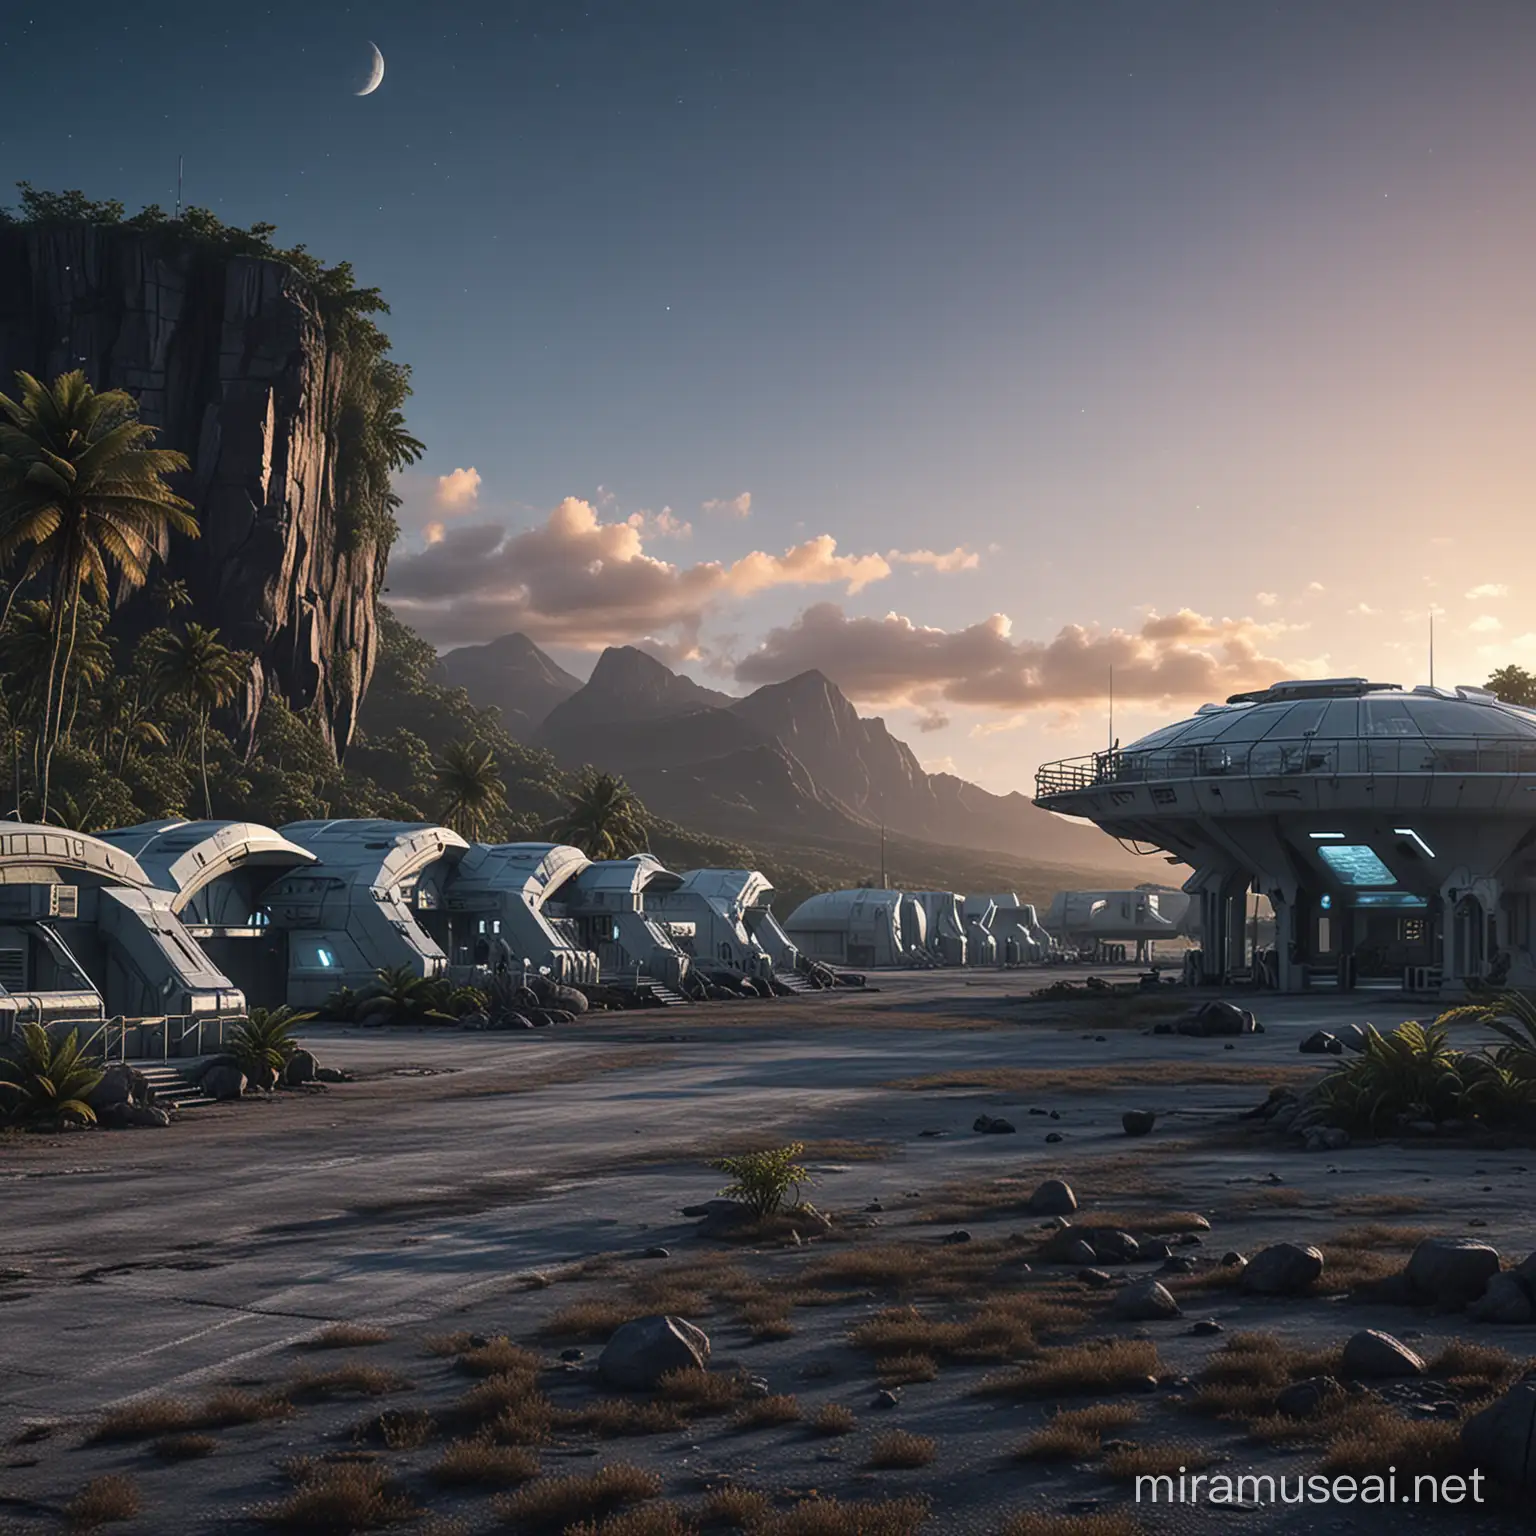 futuristic military base in a remote tropical location, clear sky, dusk, HD. 